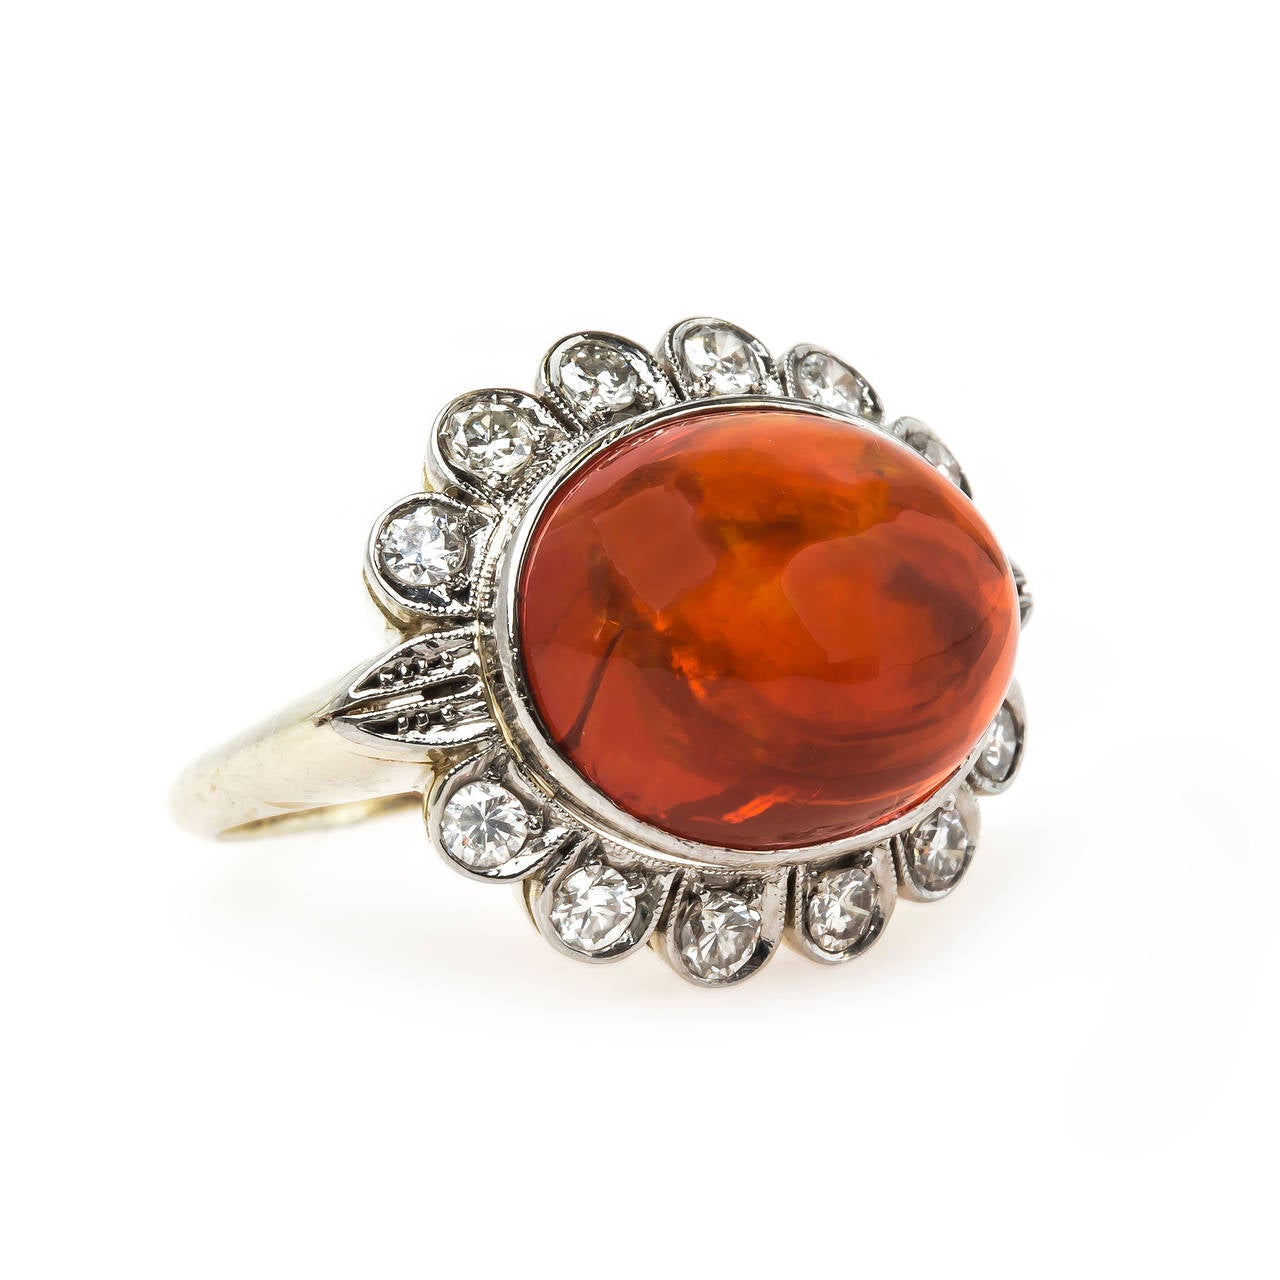 Copper Beach is an over-the-top authentic Retro era (circa 1945) platinum topped 14k yellow gold cocktail halo ring centering a large Oval Cabochon fire opal weighing exactly 6.80cts and surrounded twelve Round Brilliant Cut diamonds totaling